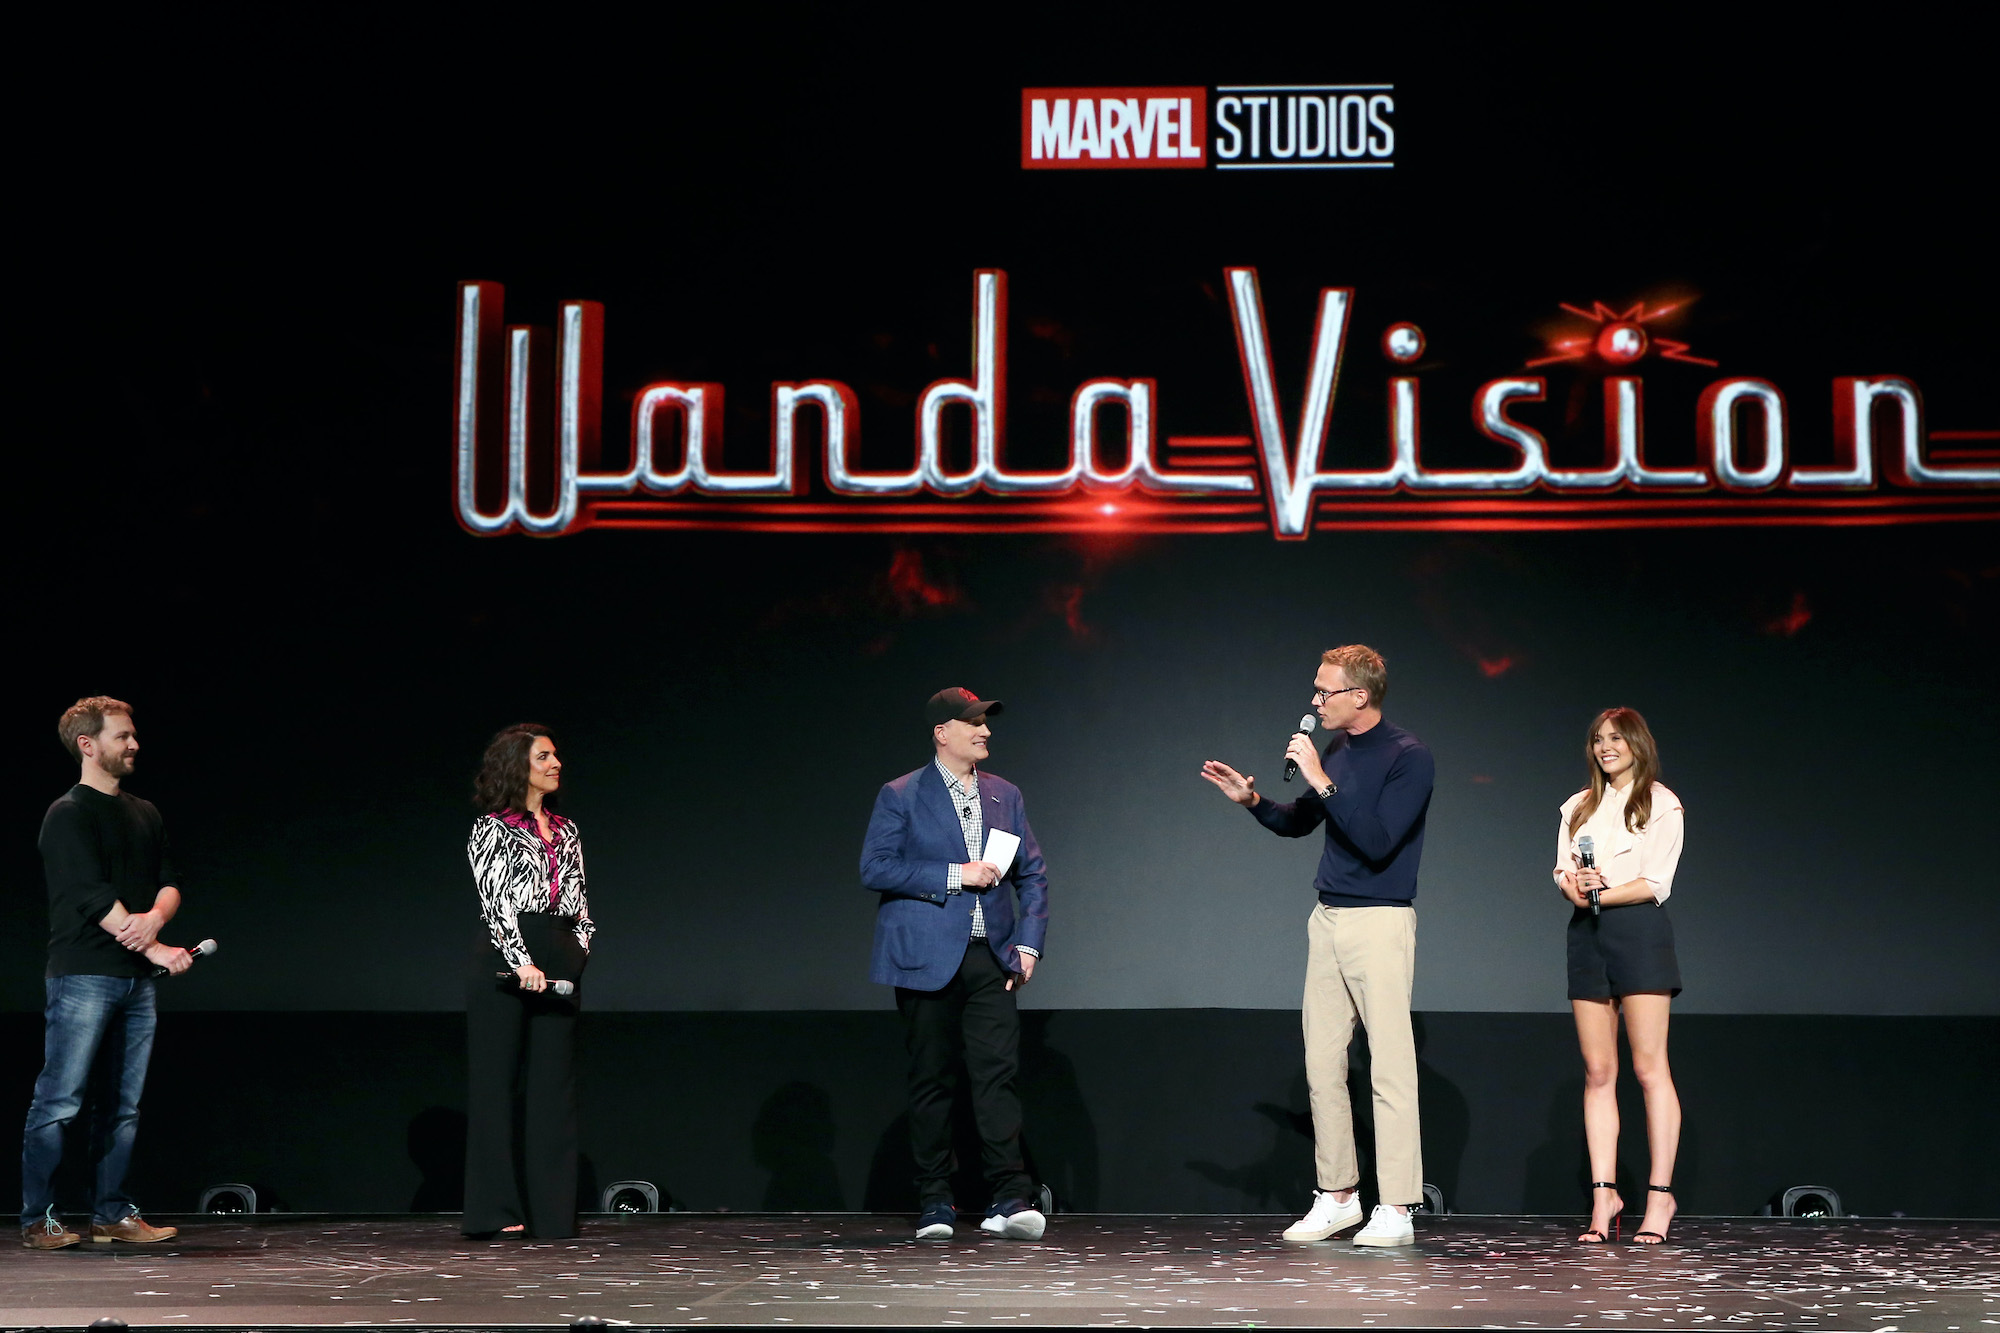 The cast and crew of WandaVision